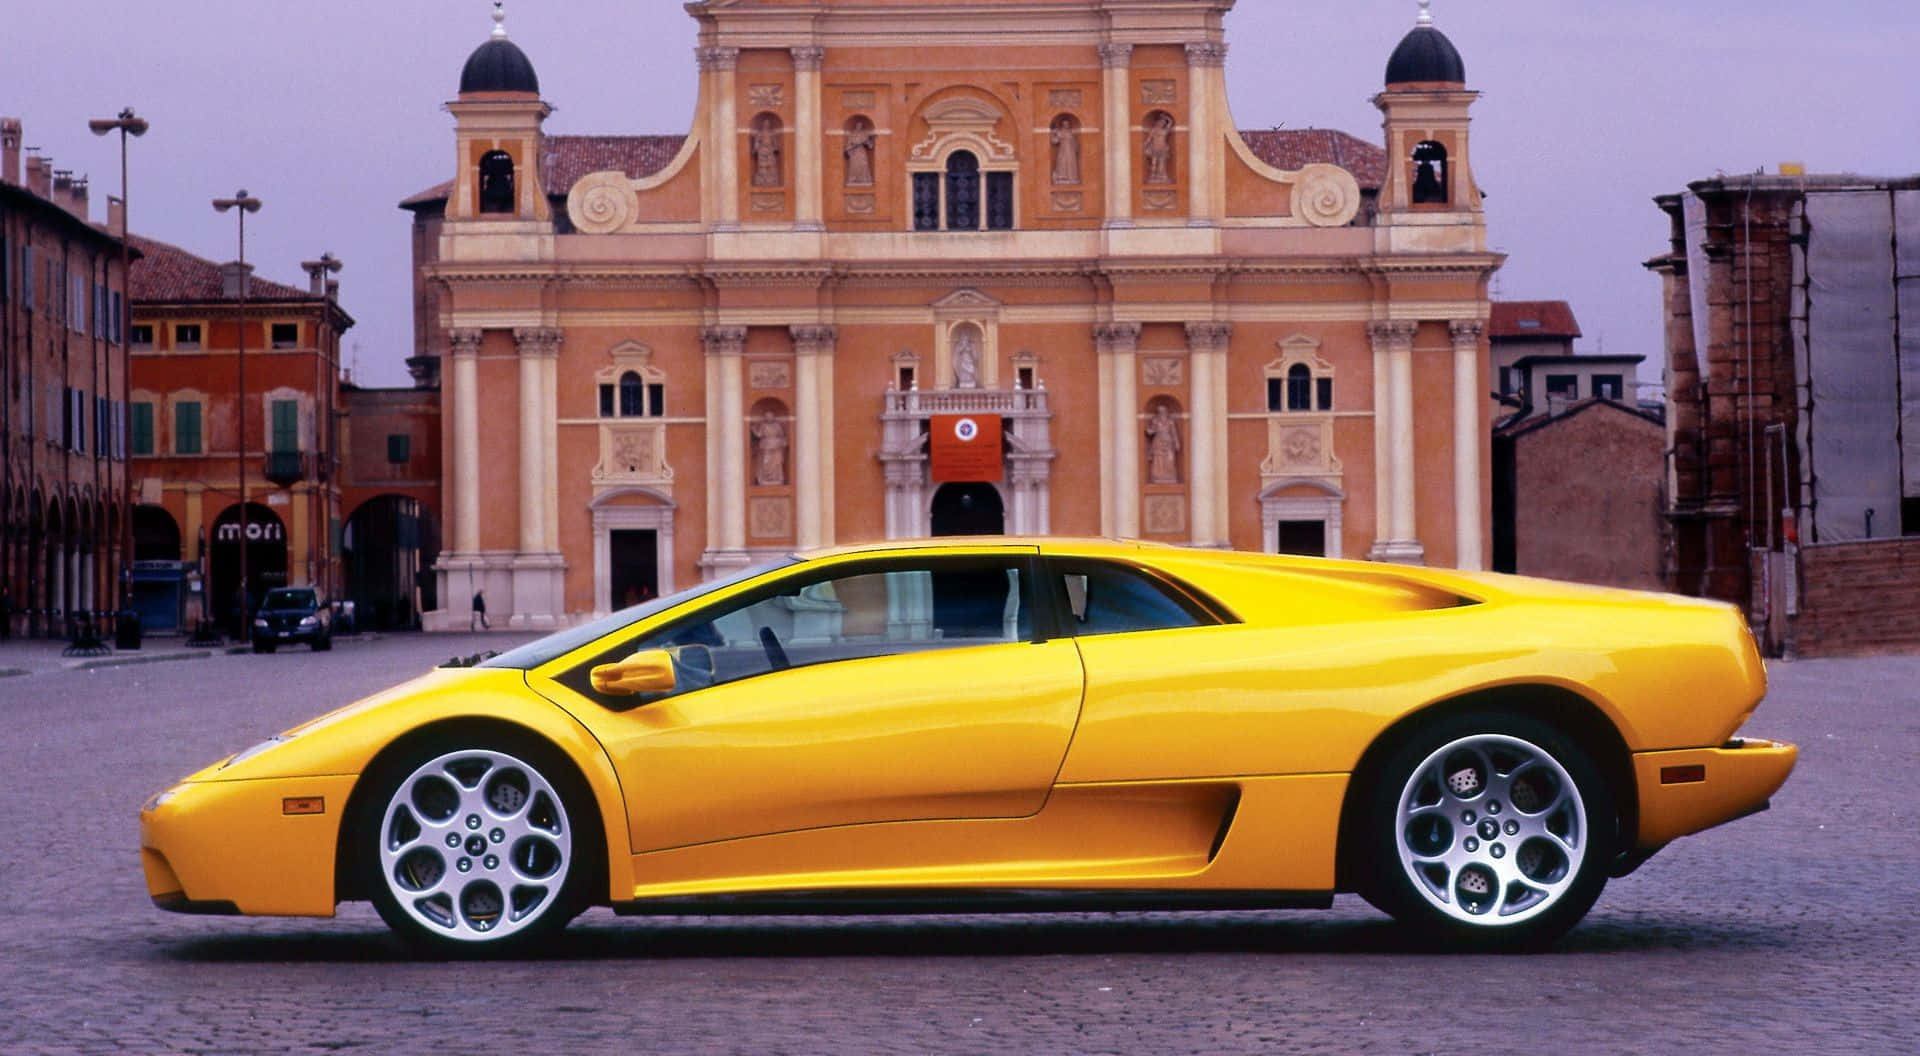 The iconic Lamborghini Diablo sports car showcasing its sleek design and powerful stance on the road. Wallpaper